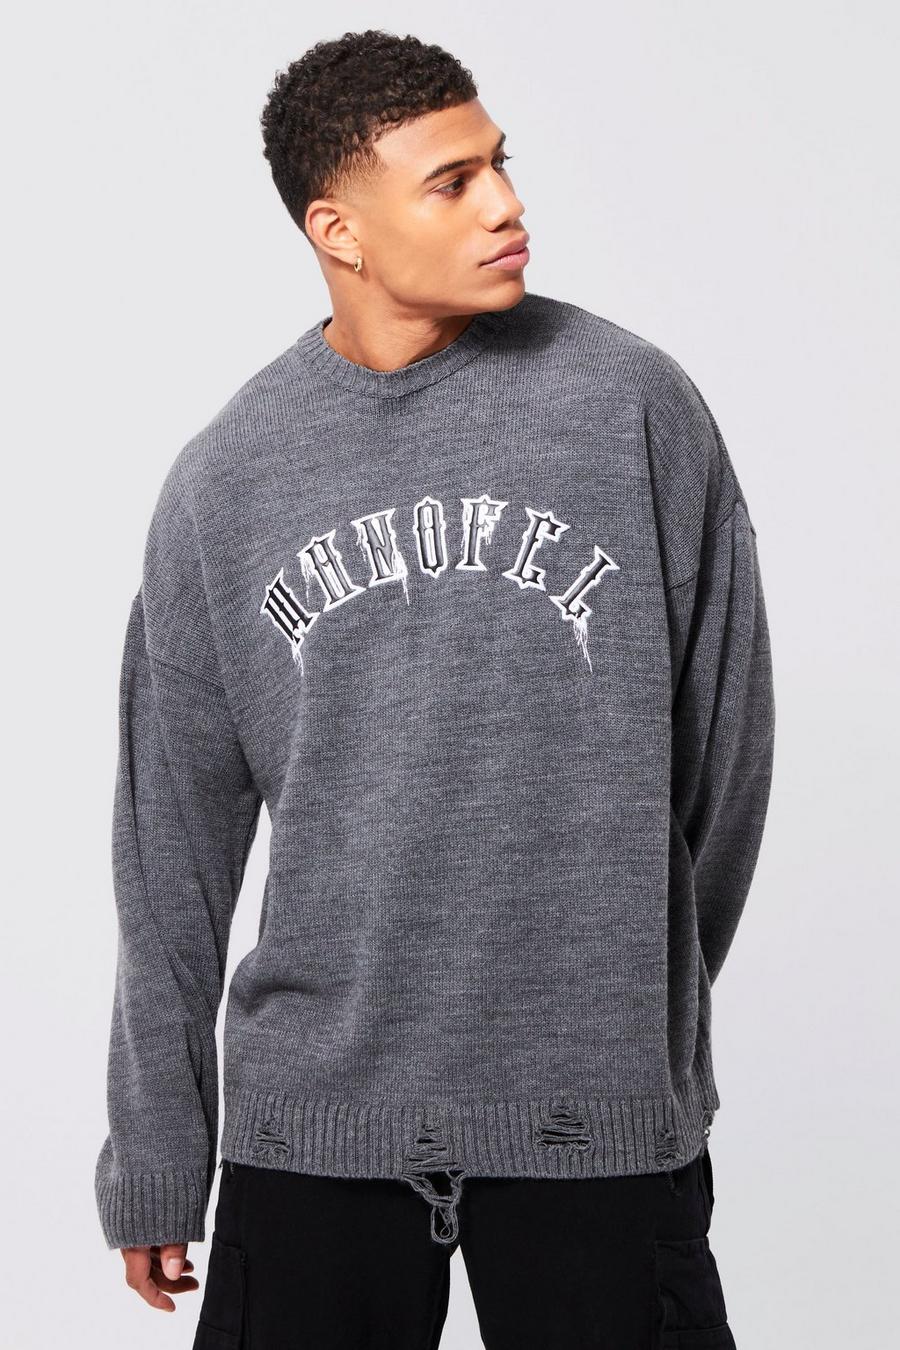 PU Man Official Strickpullover, Charcoal grey